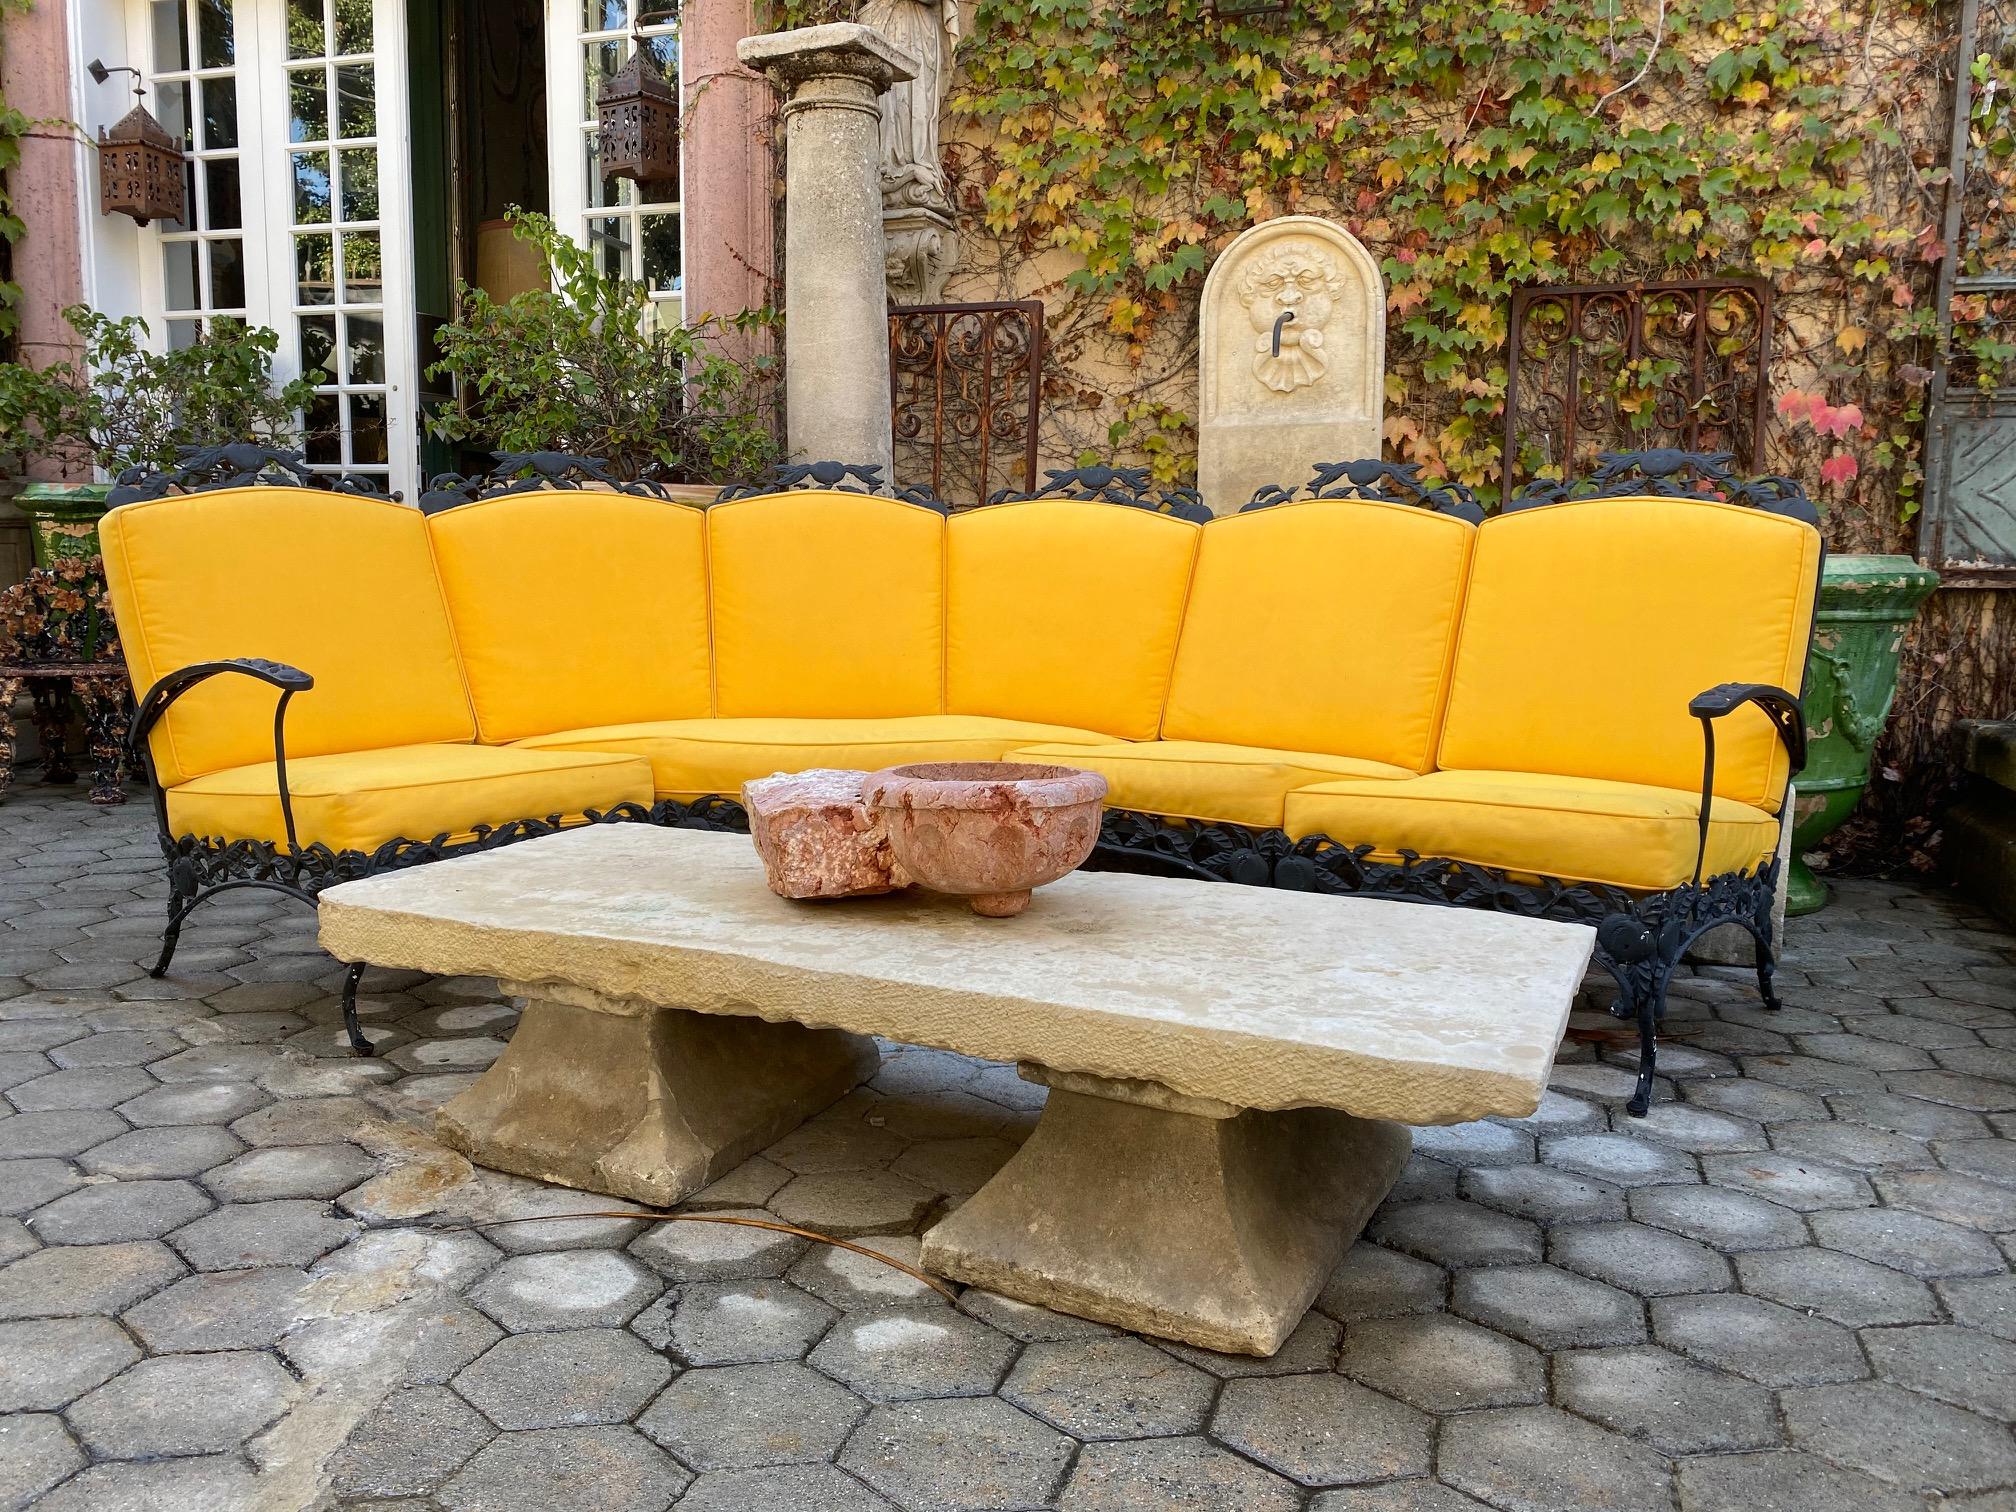 18th century hand carved stone antique garden low coffee outdoor indoor table.
It will be the perfect touch by an outdoor fireplace, This table has a lot of charm and character. It can work in a Mid-Century Modern or an old charm rustic Provençal